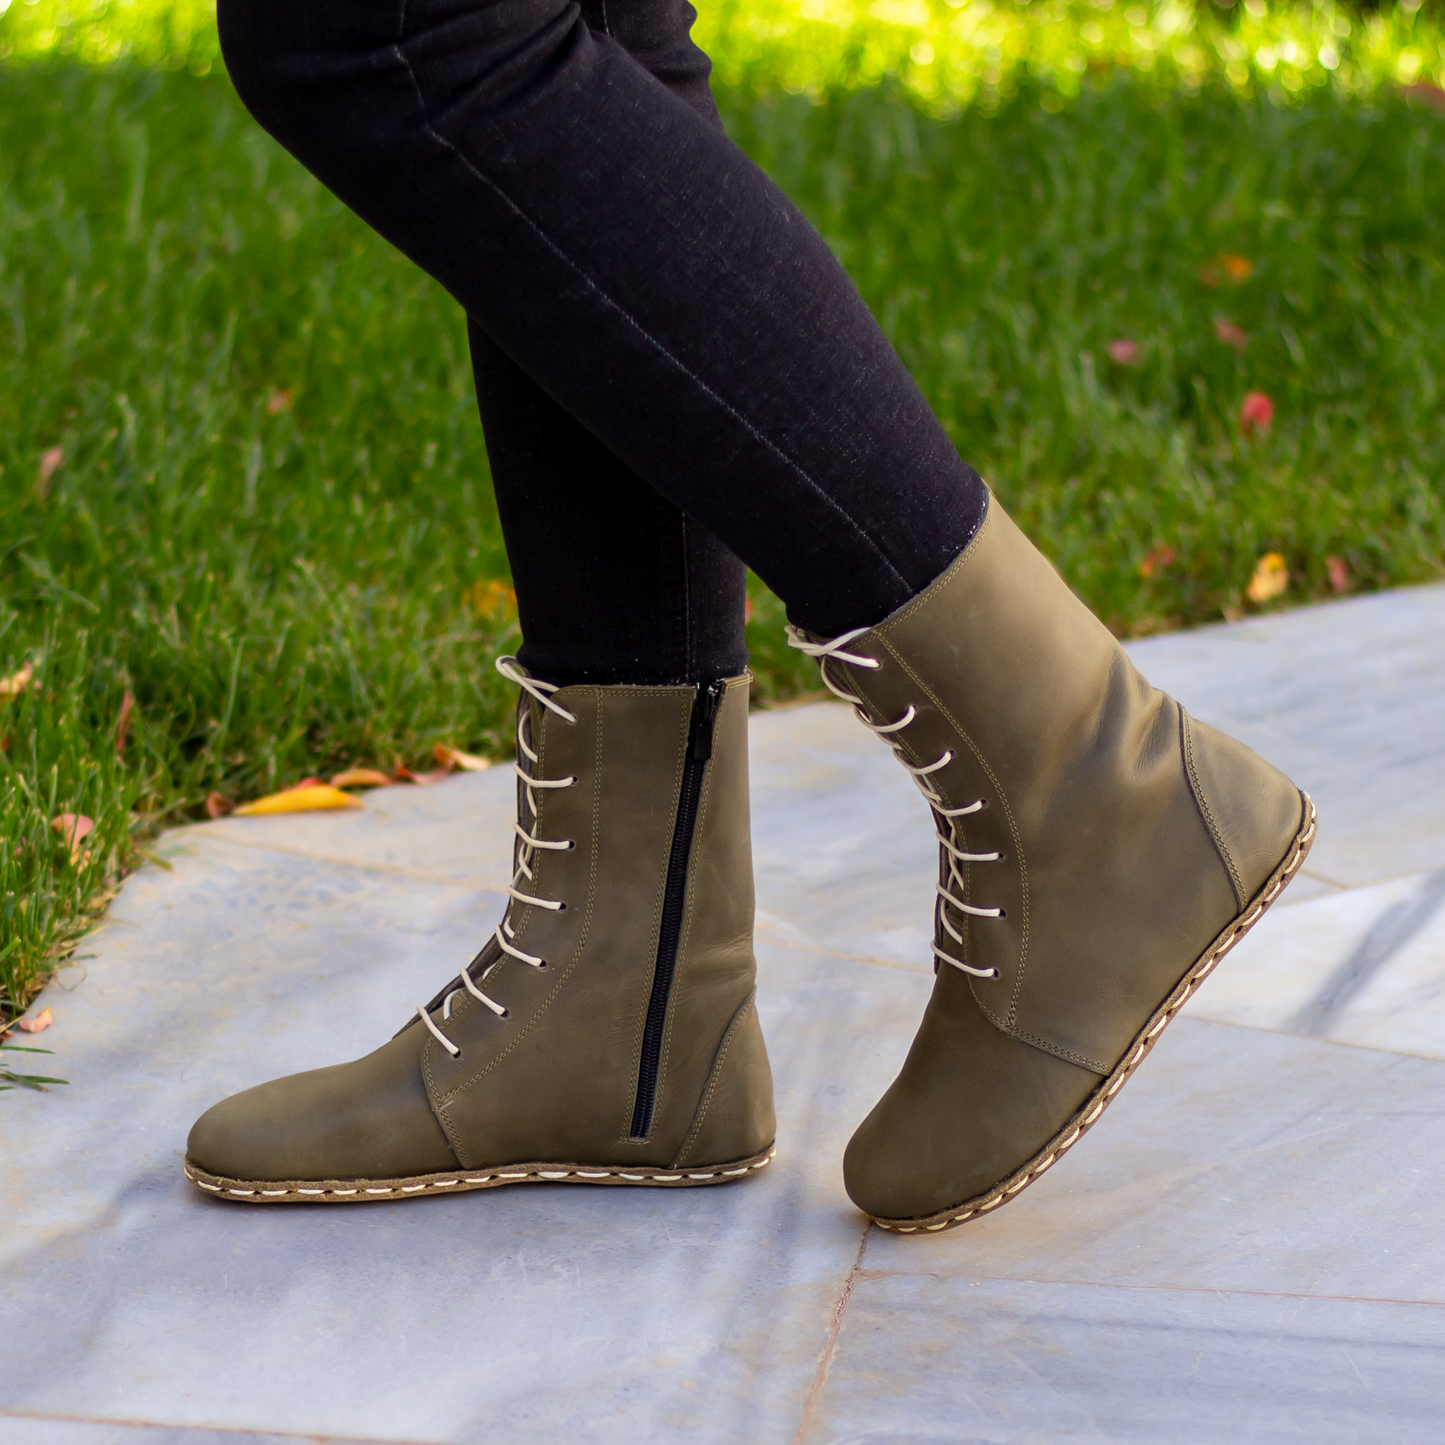 Green Leather Boot | Barefoot Women Boot | Earthing Leather Boots | Grounding Copper Rivet | Buffalo Leather Outsole | Crazy Olive Green